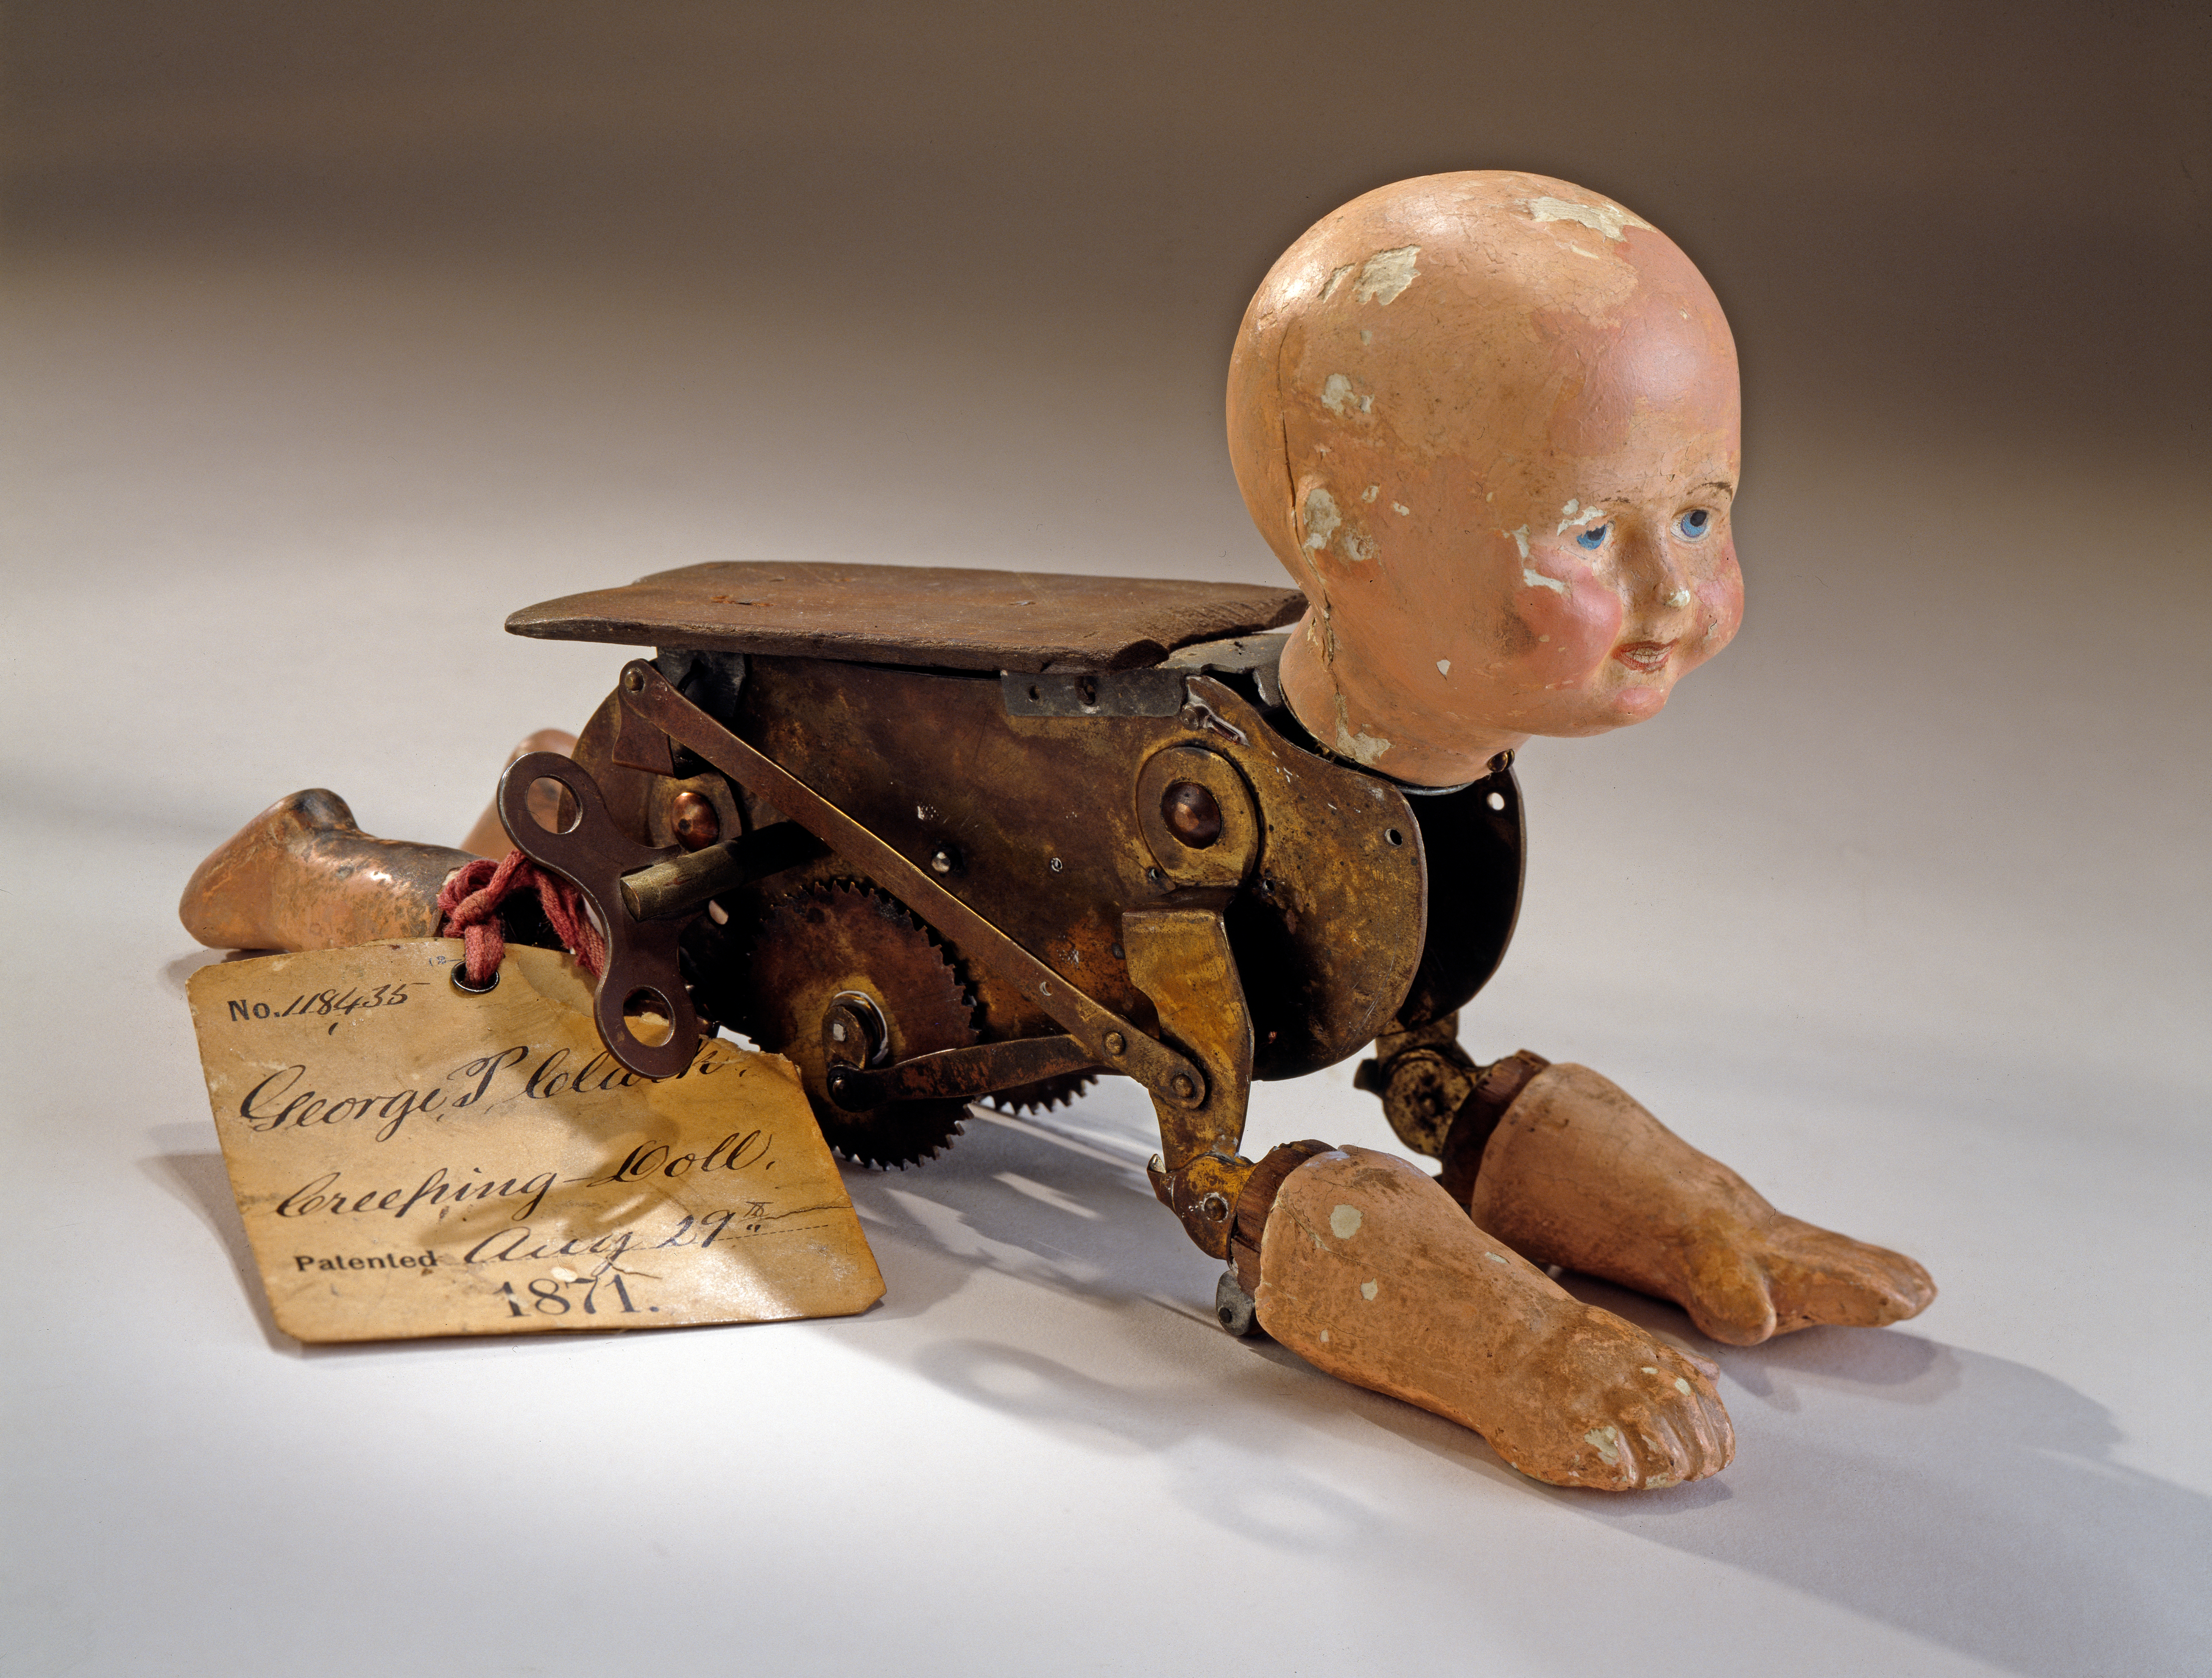 Photo of a mechanized doll which appears poised to crawl across the white tabletop. The doll has no hair, rosy cheeks, and blue painted eyes. Its head is attached to the metal workings that make up the body of the doll, upon which porcelain hands and feet have been attached. The clockwork gears and key are on the doll's side, along with a tag which has handwriting that says "No. 118435. George P. Clark. Patented Aug 29, 1871."